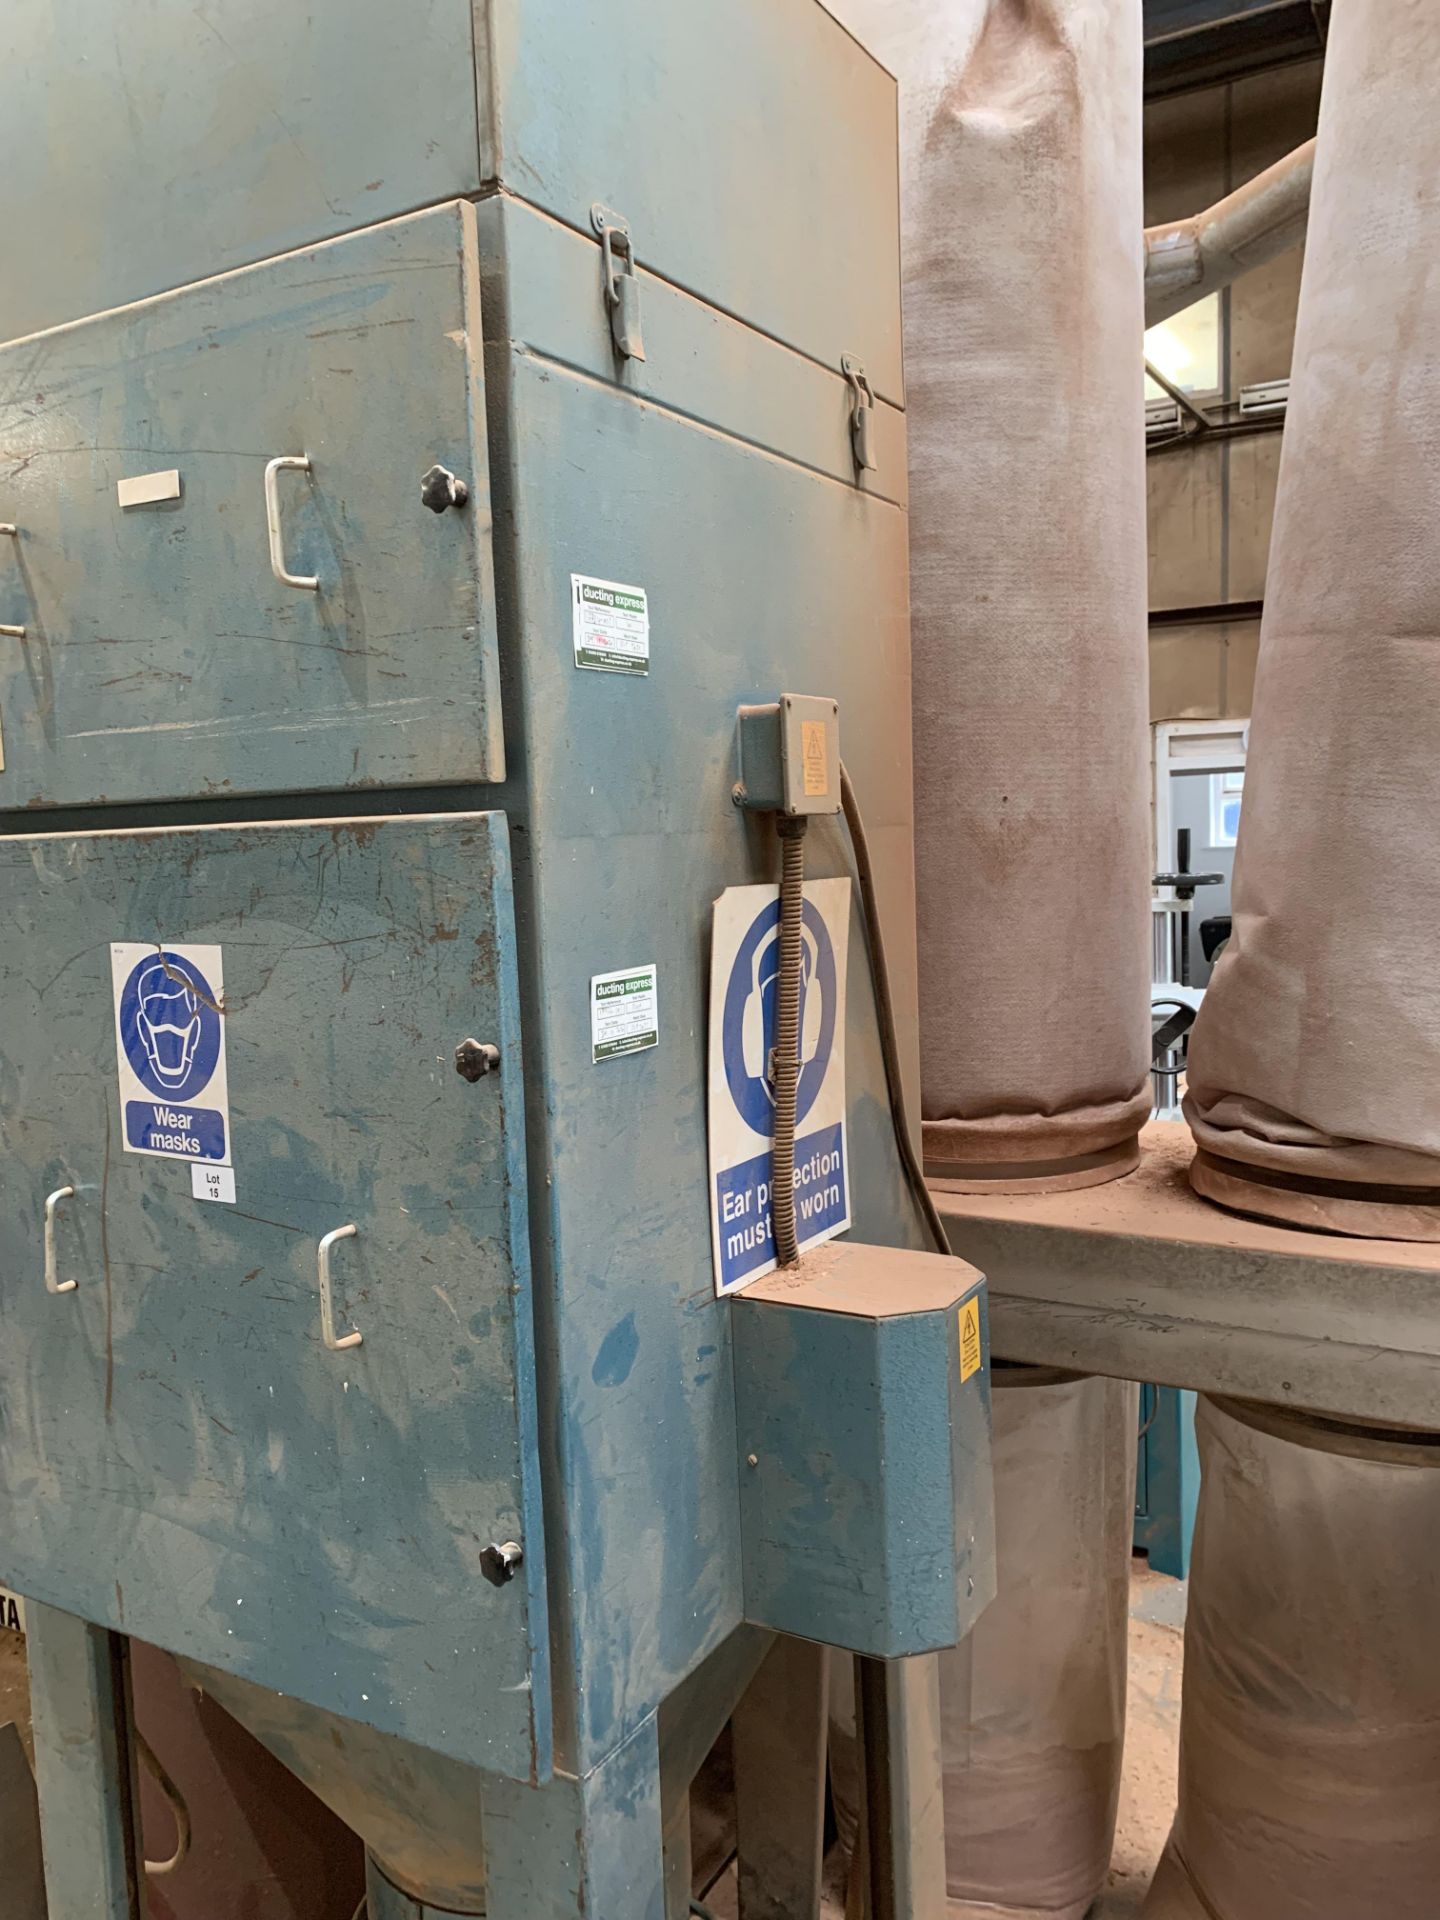 P & J Dust Extraction Unit - Image 2 of 3